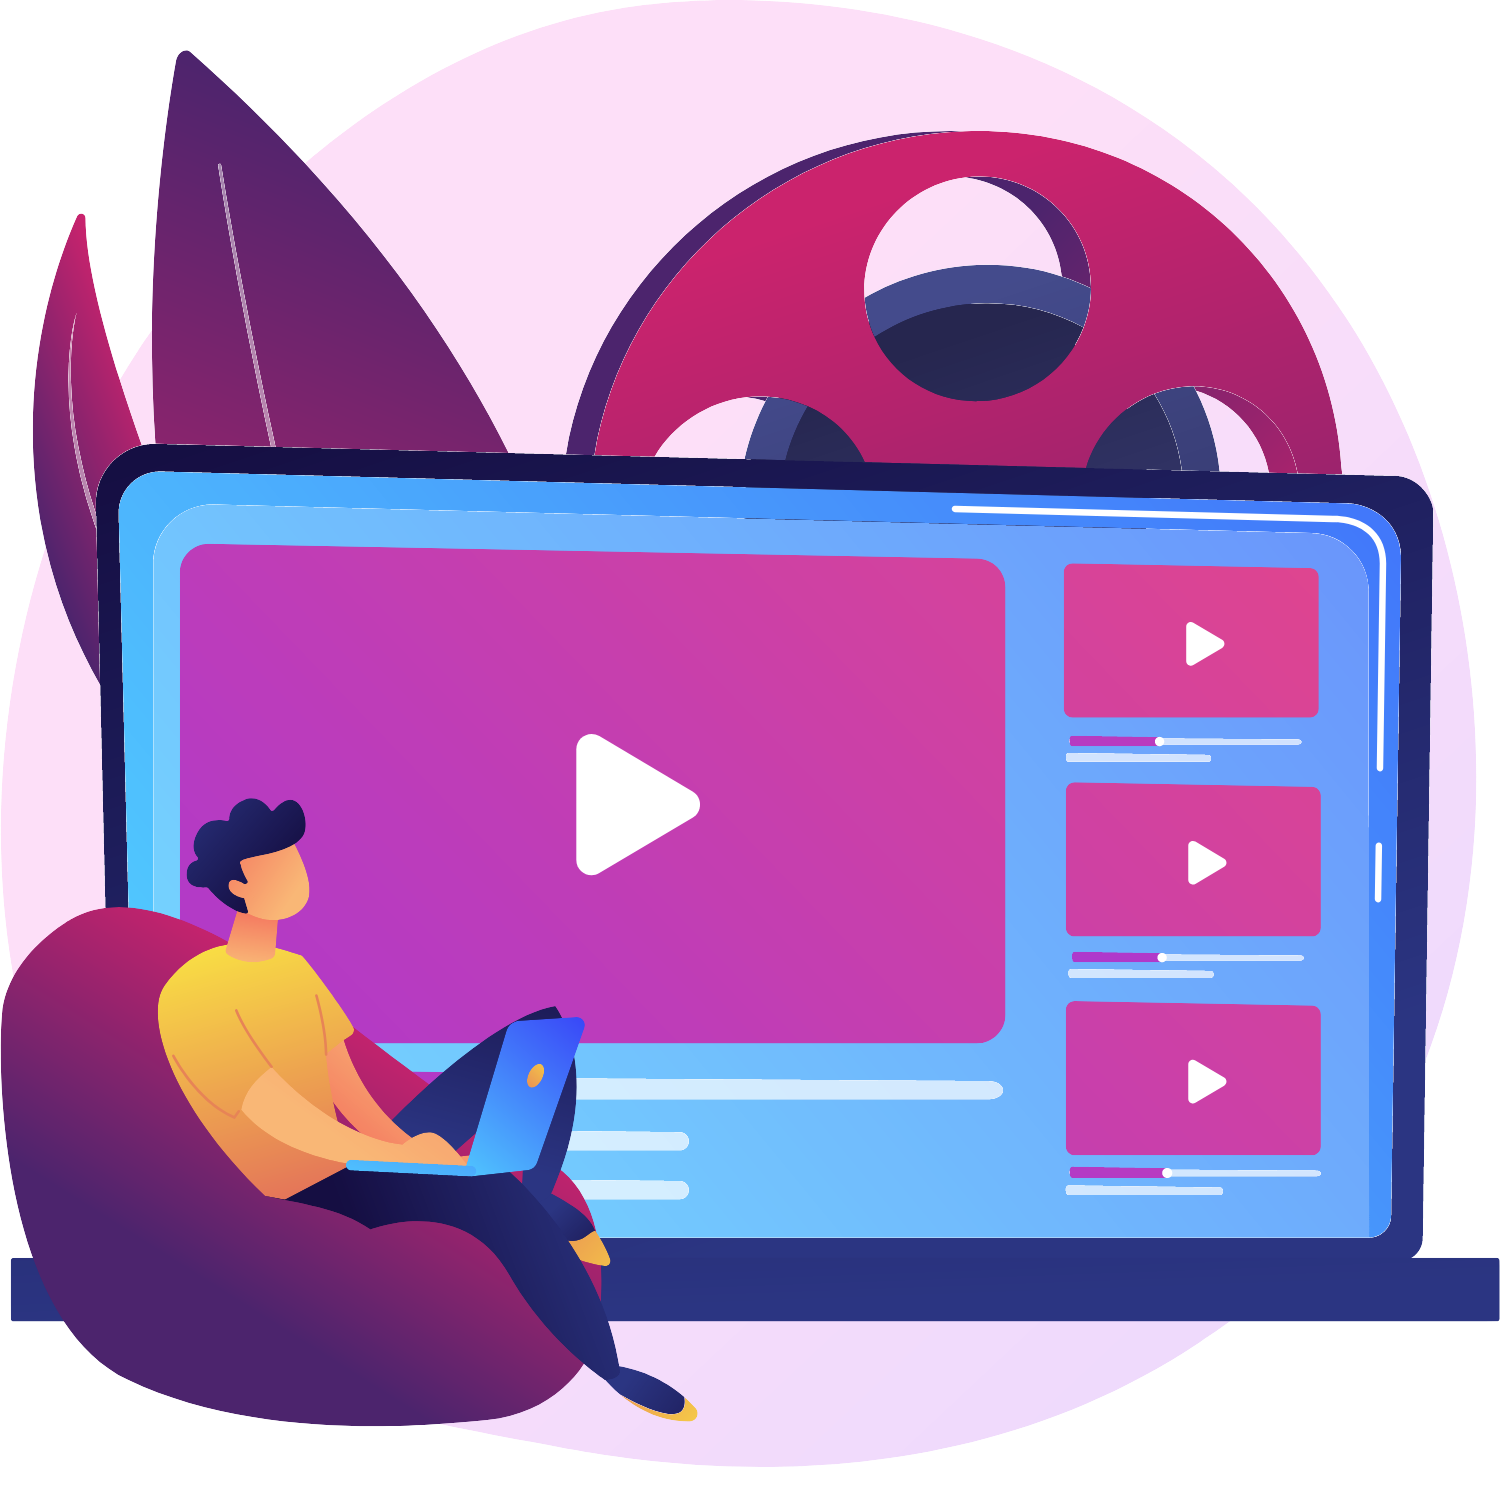 Illustration capturing the dynamic nature of Video Advertising with a play button and film reel, representing Proventus Digital's expertise in visual storytelling.